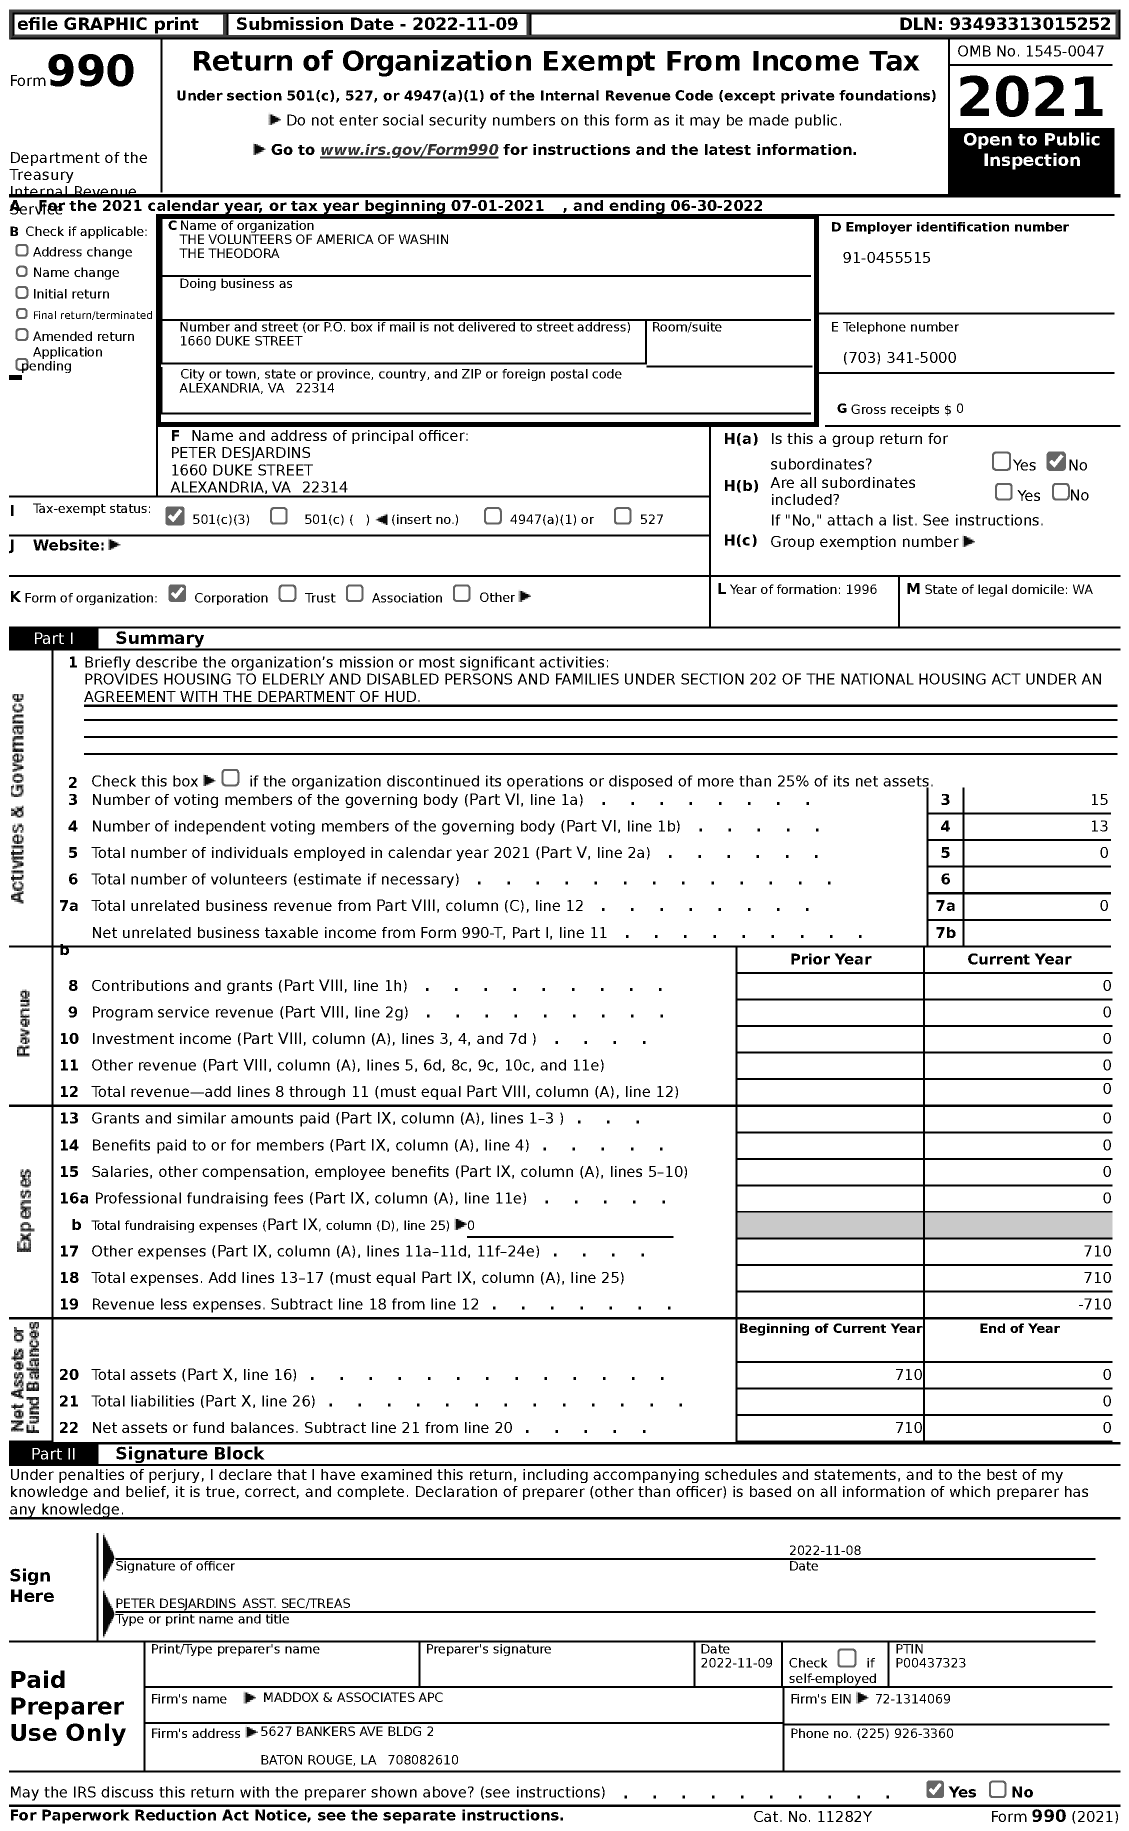 Image of first page of 2021 Form 990 for The Volunteers of America of Washin the Theodora (VOA)